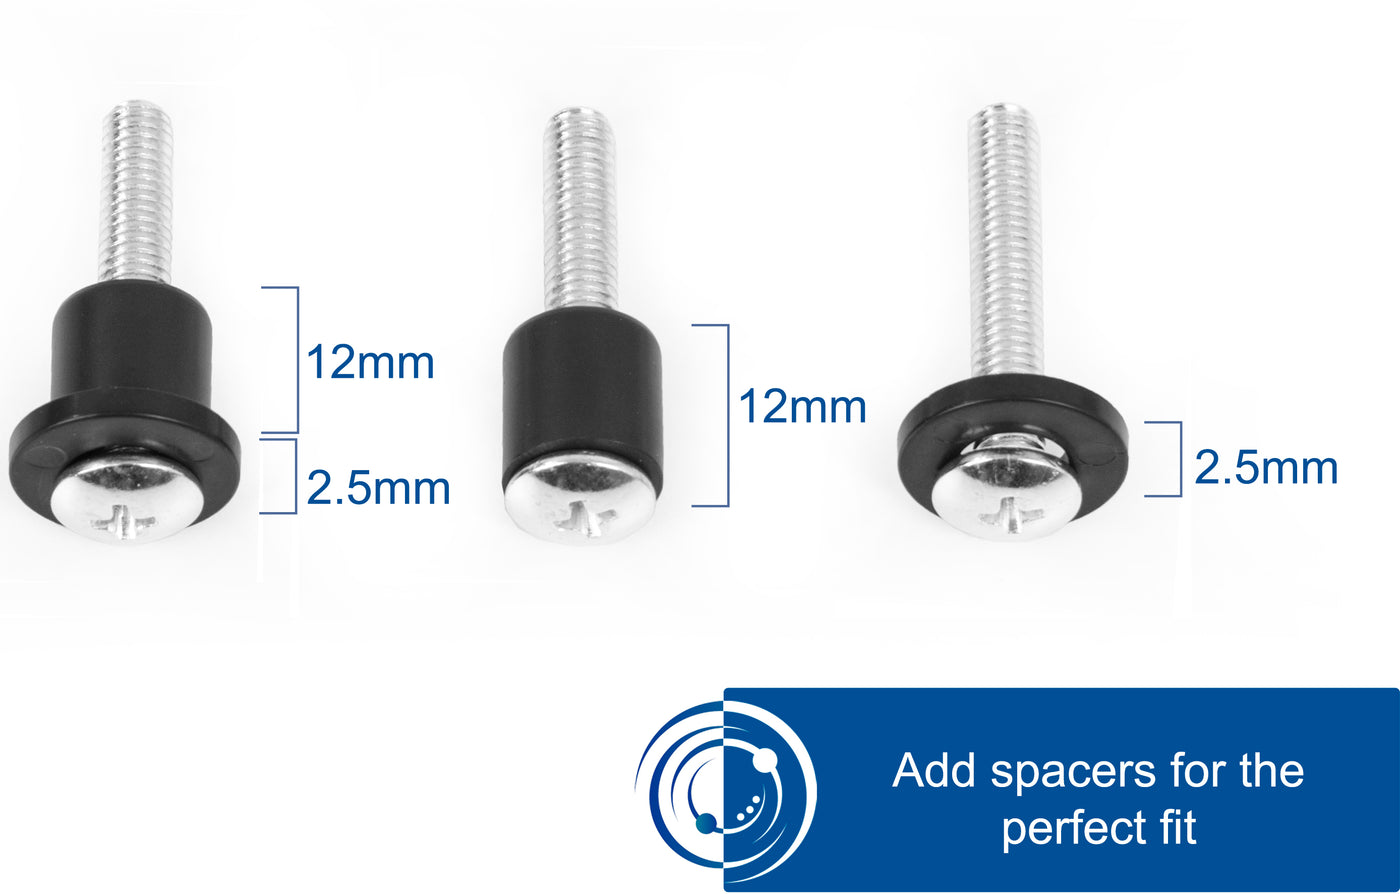 Spacers are included to attain the perfect fit of whatever you are mounting.